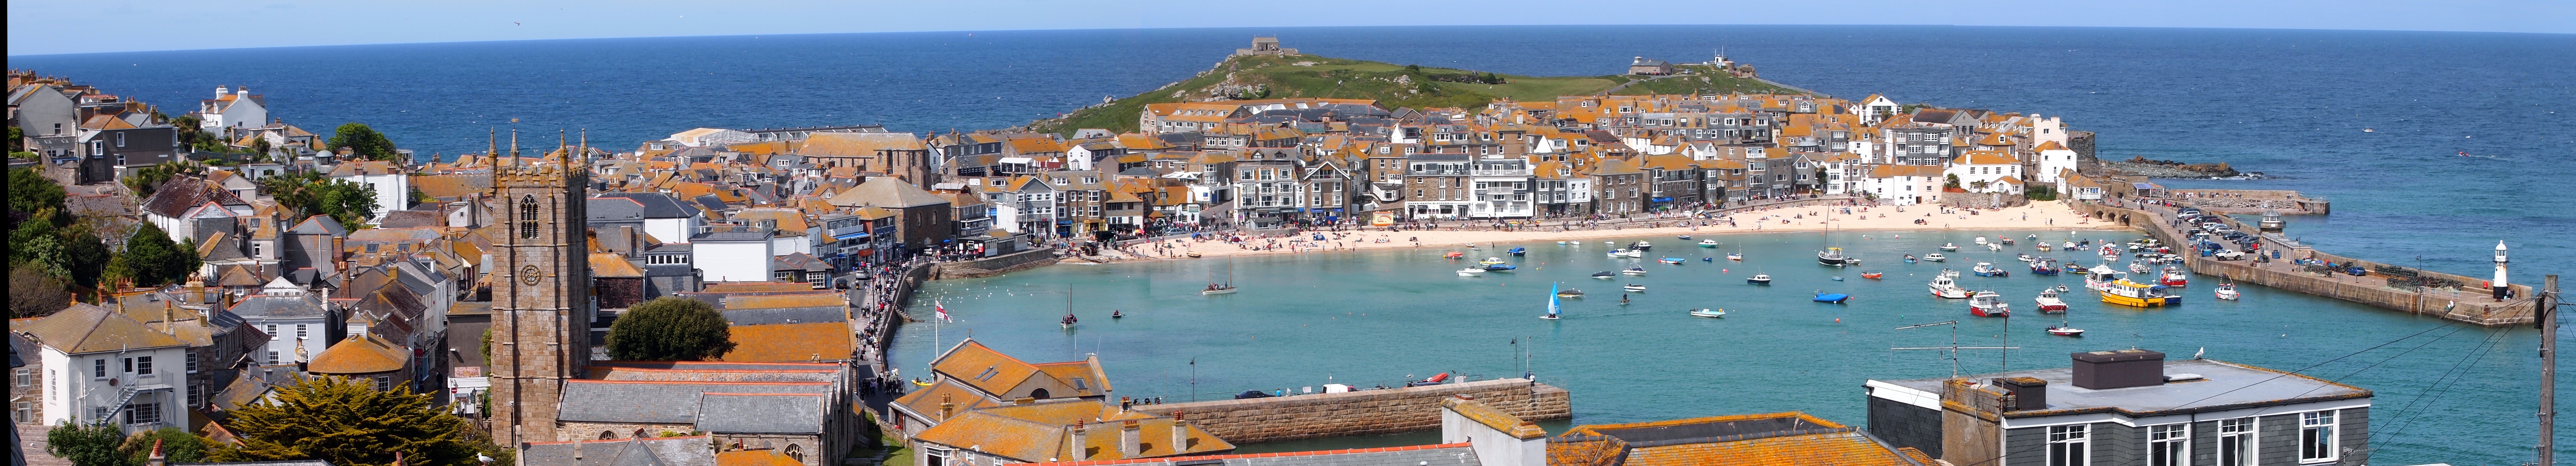 P5140713-Stitch-st-ives-harbour-panorama